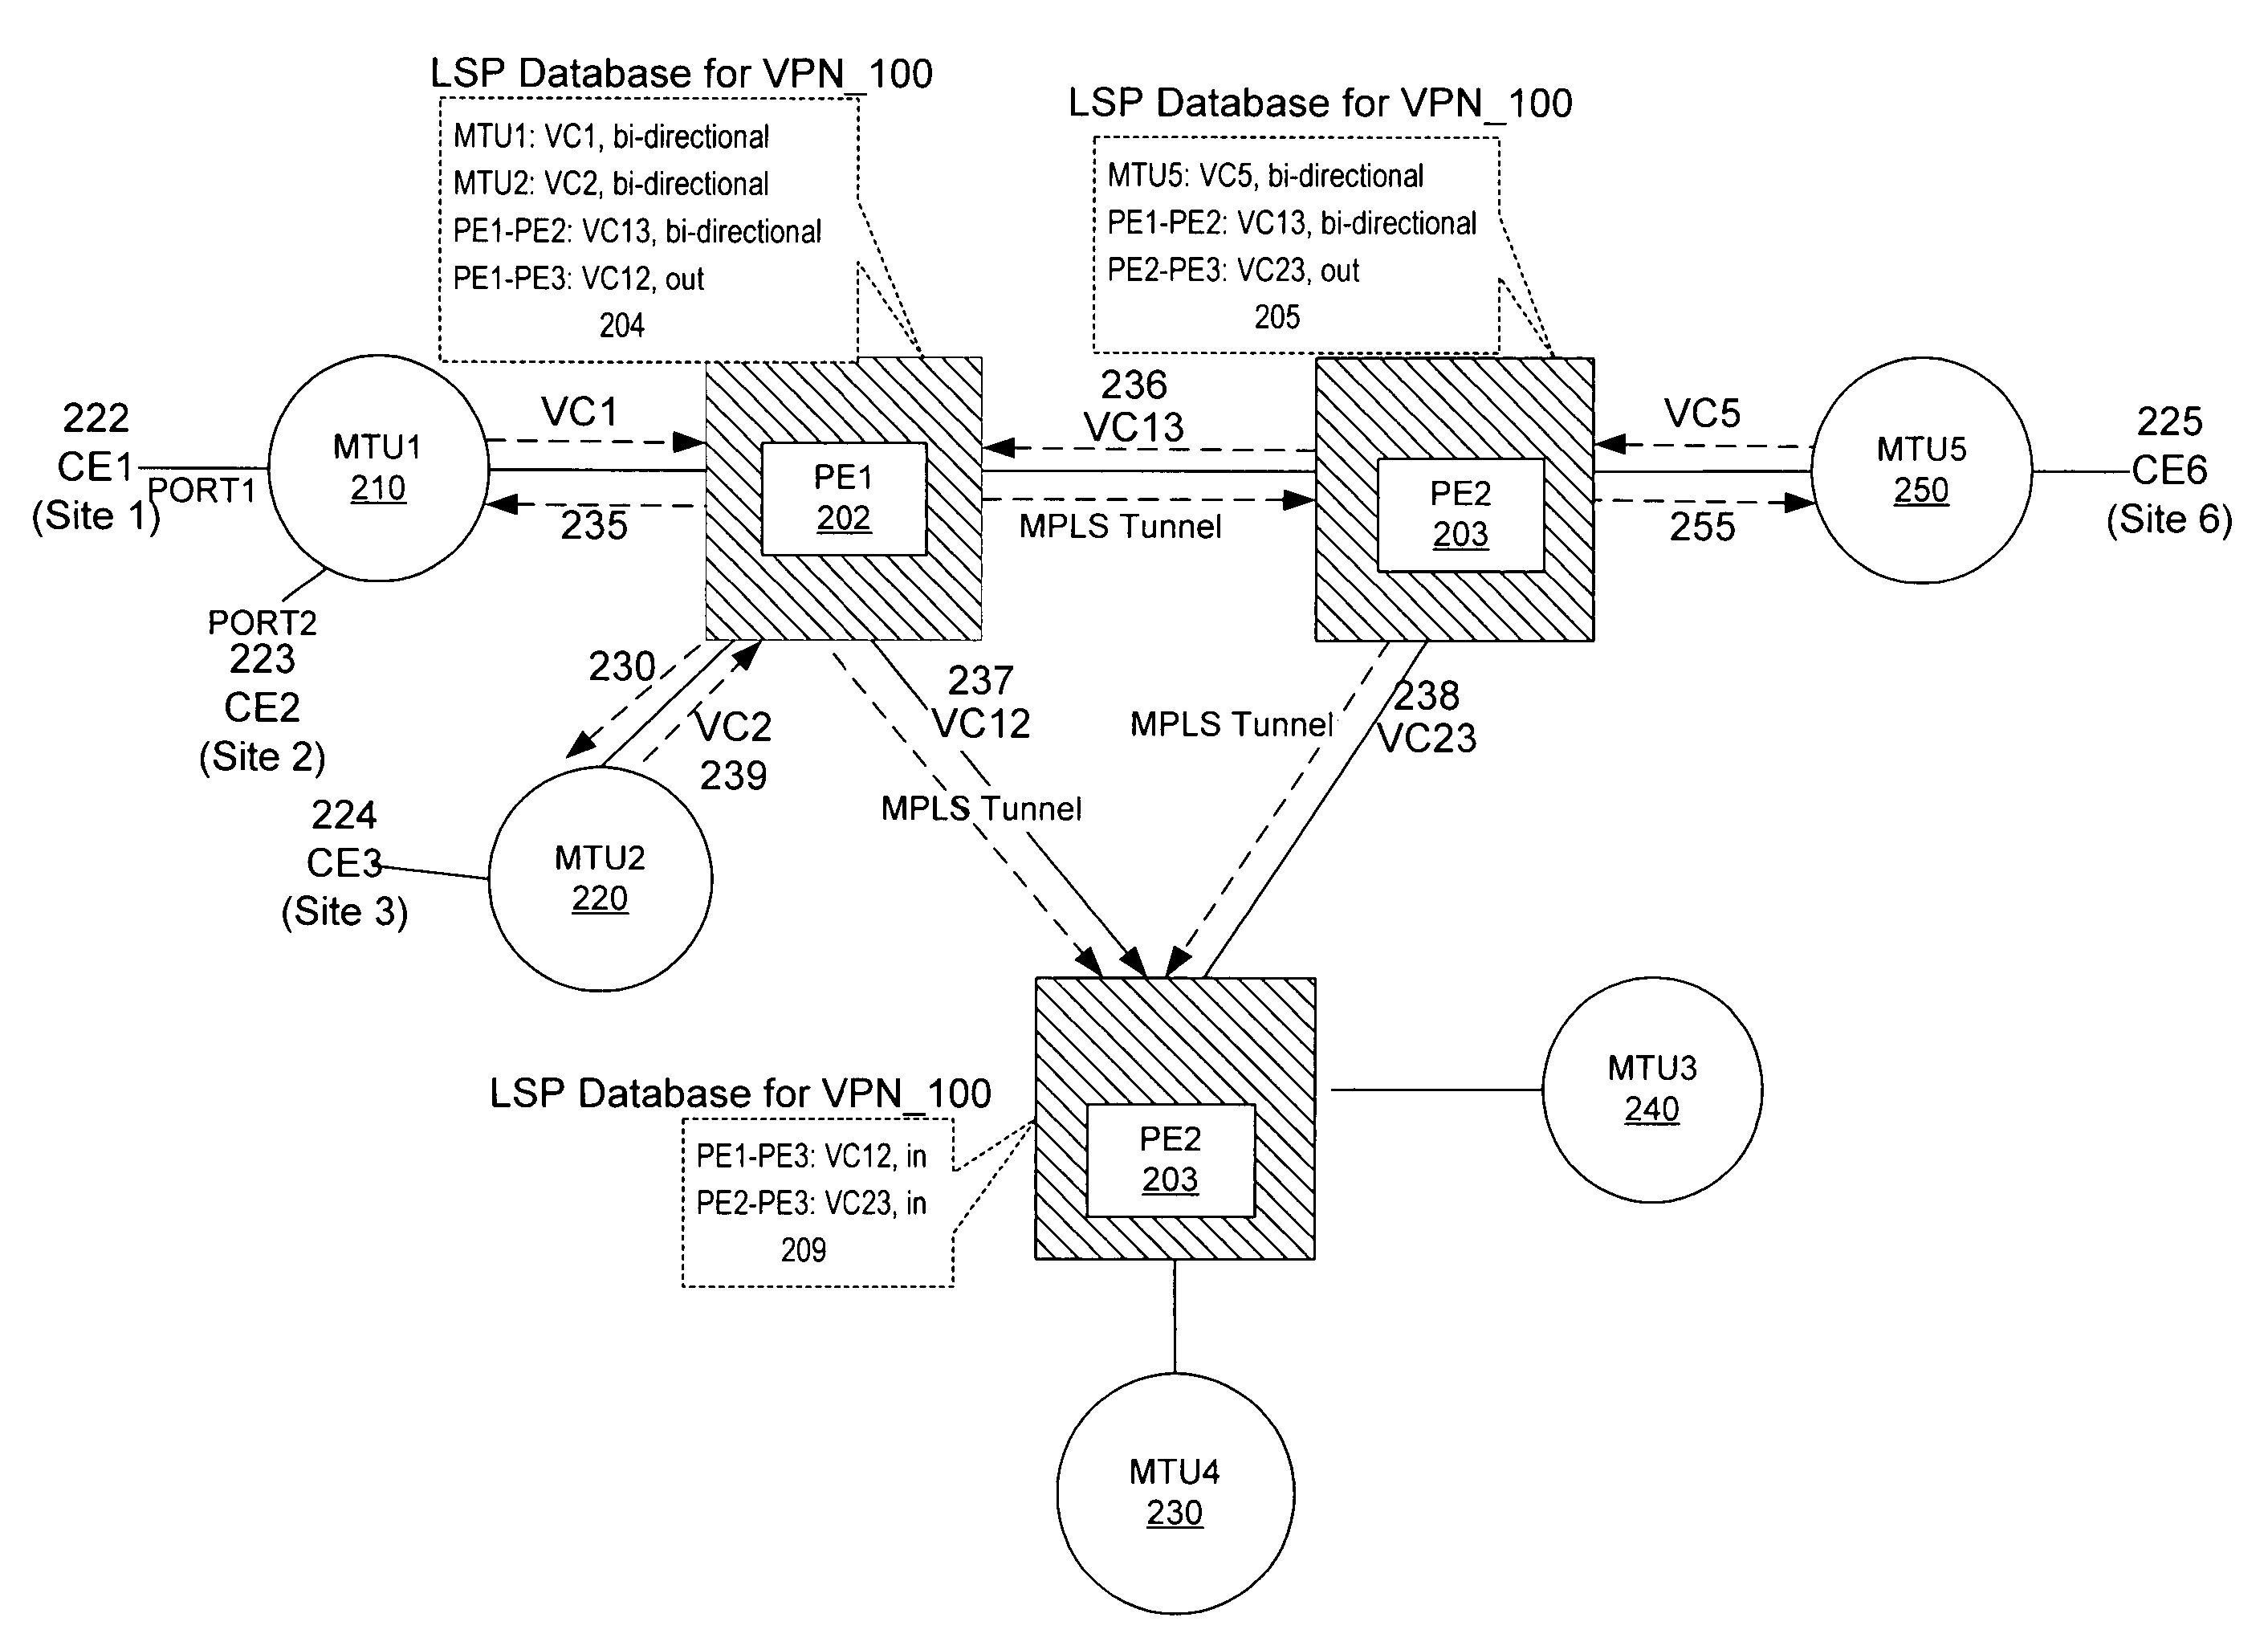 Method and system for automating membership discovery in a distributed computer network